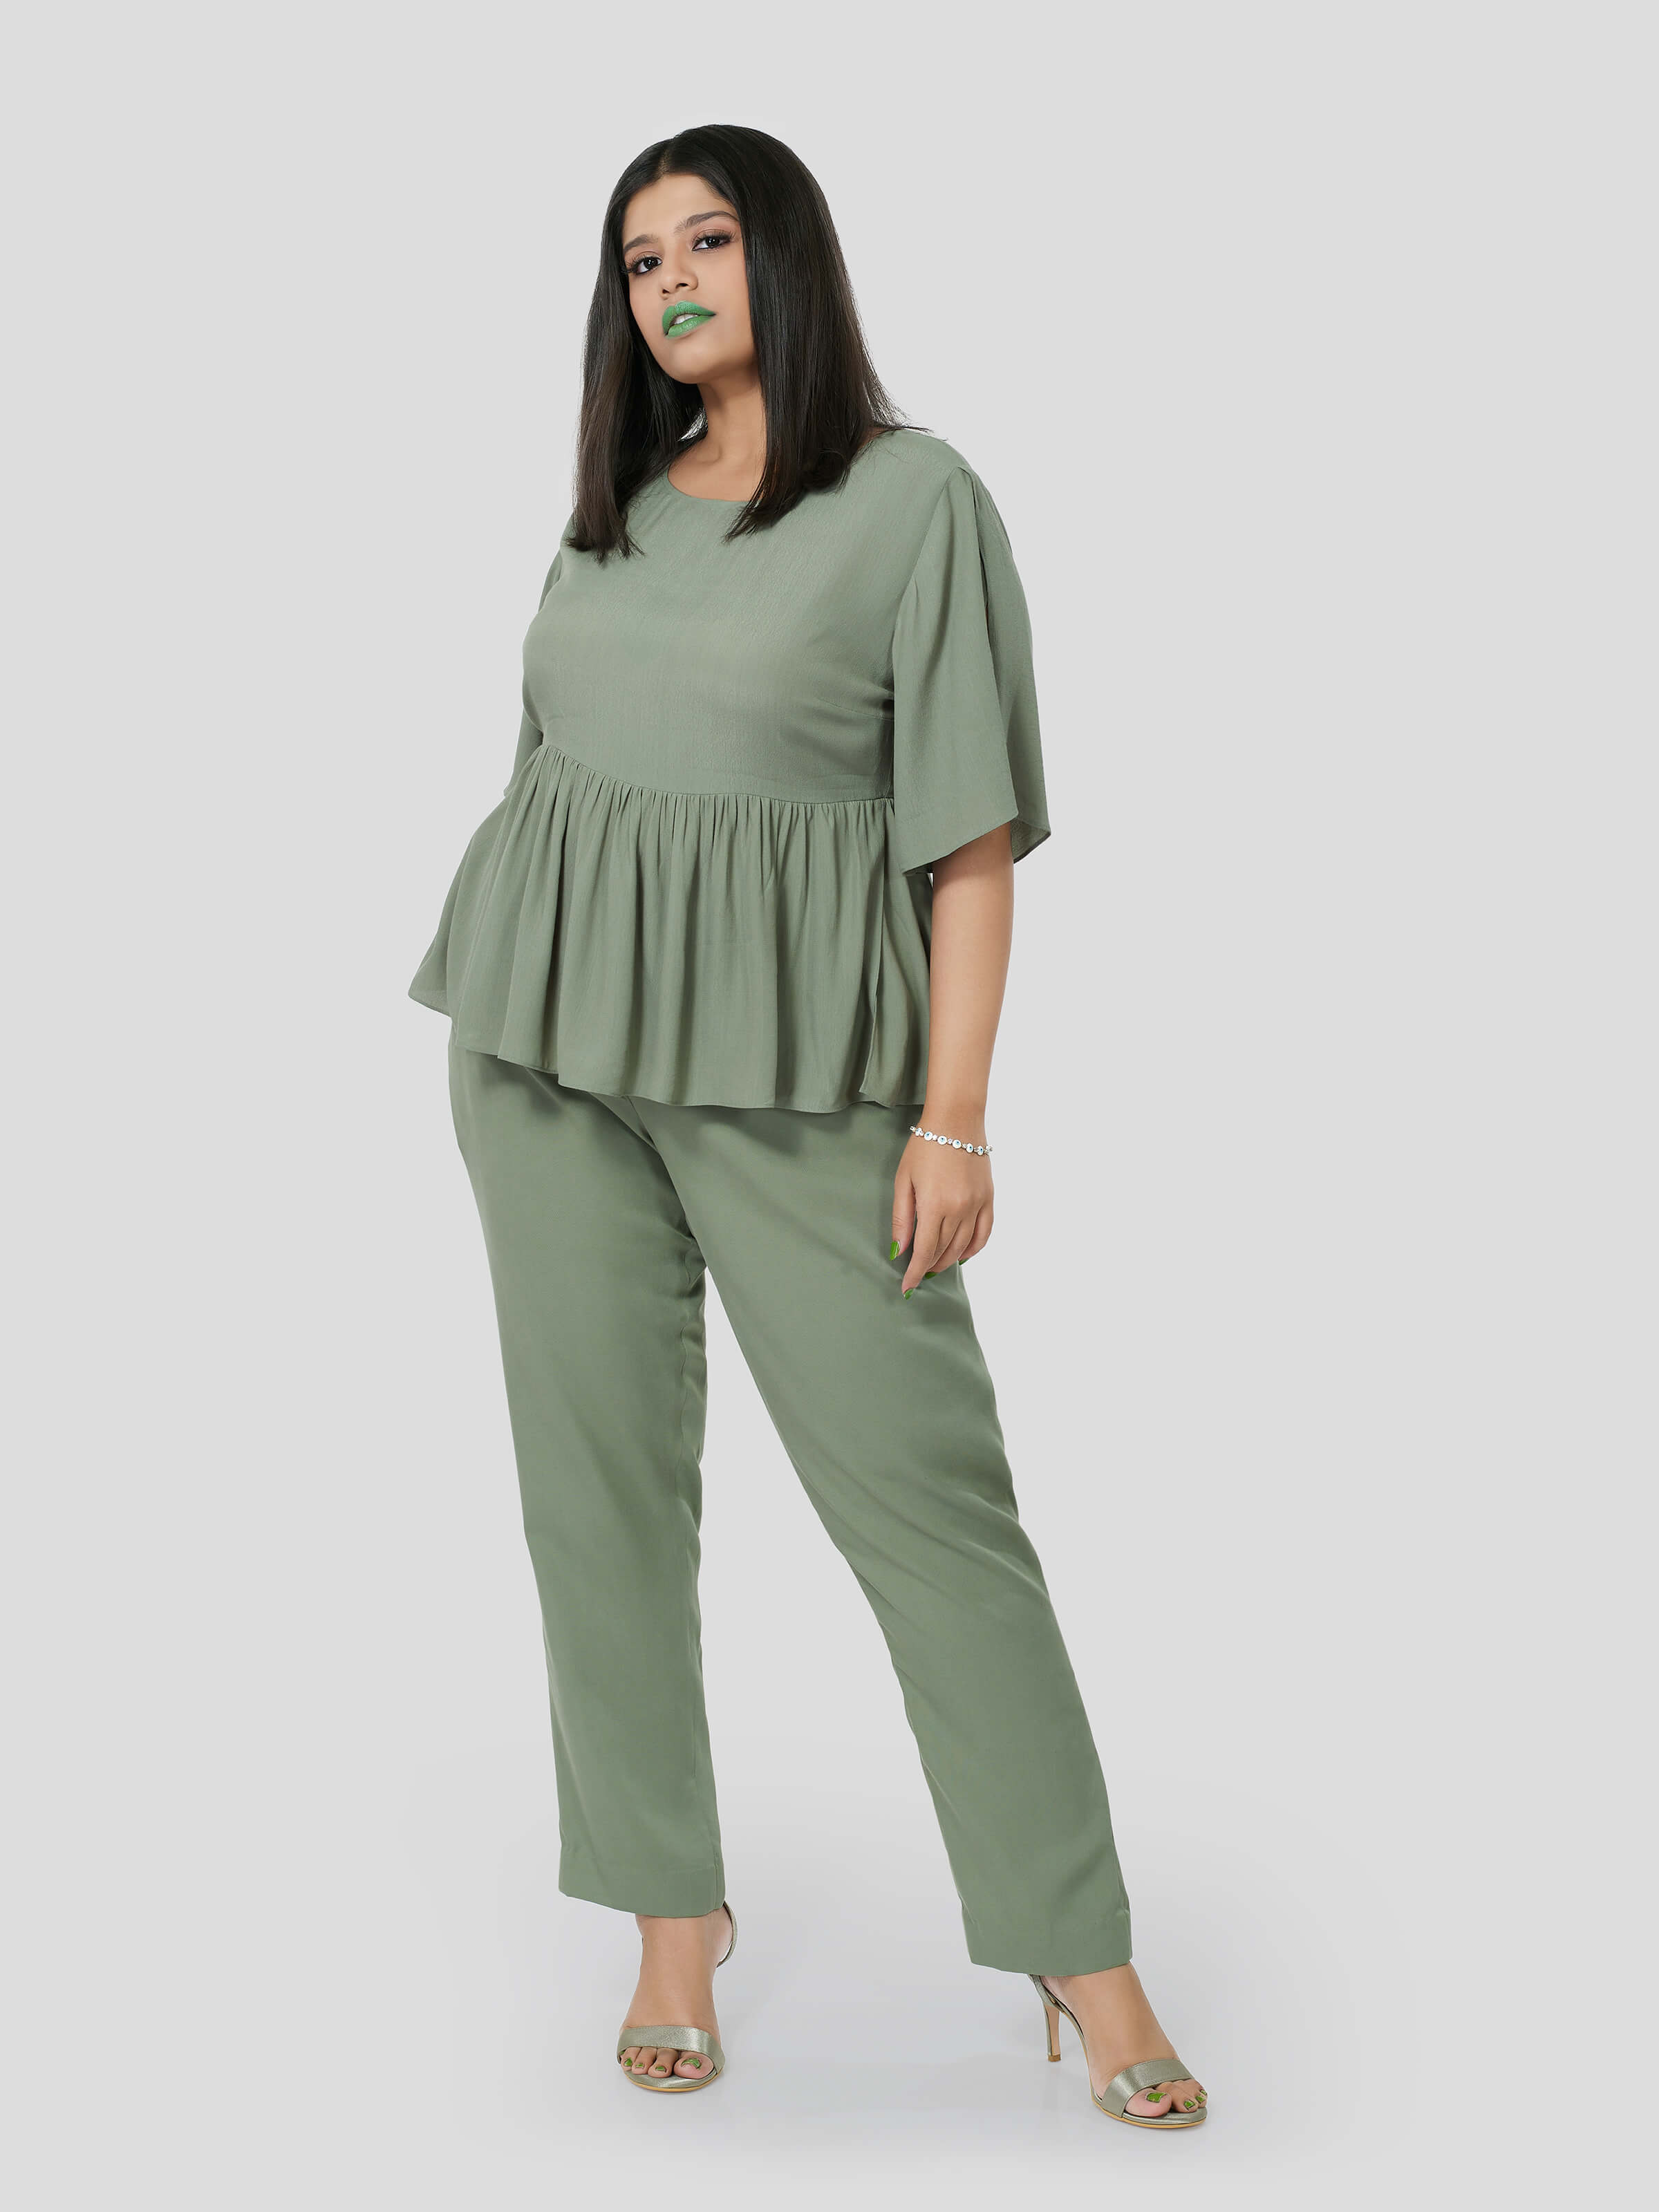 Green Flared Top with Narrow Pants - Zest Mélange 